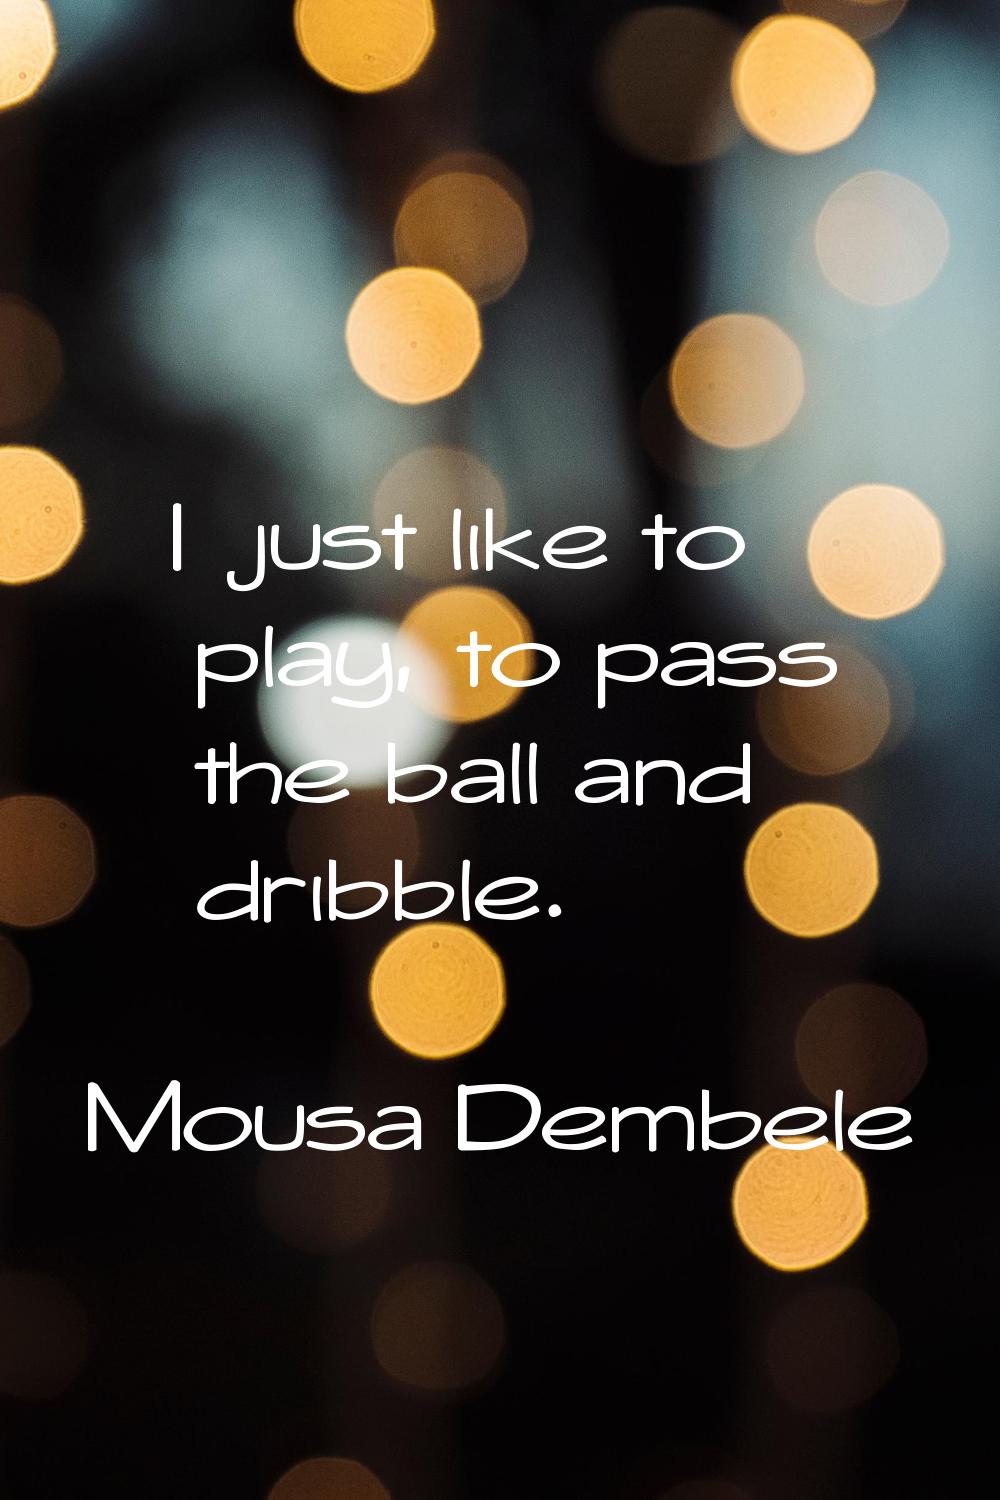 I just like to play, to pass the ball and dribble.